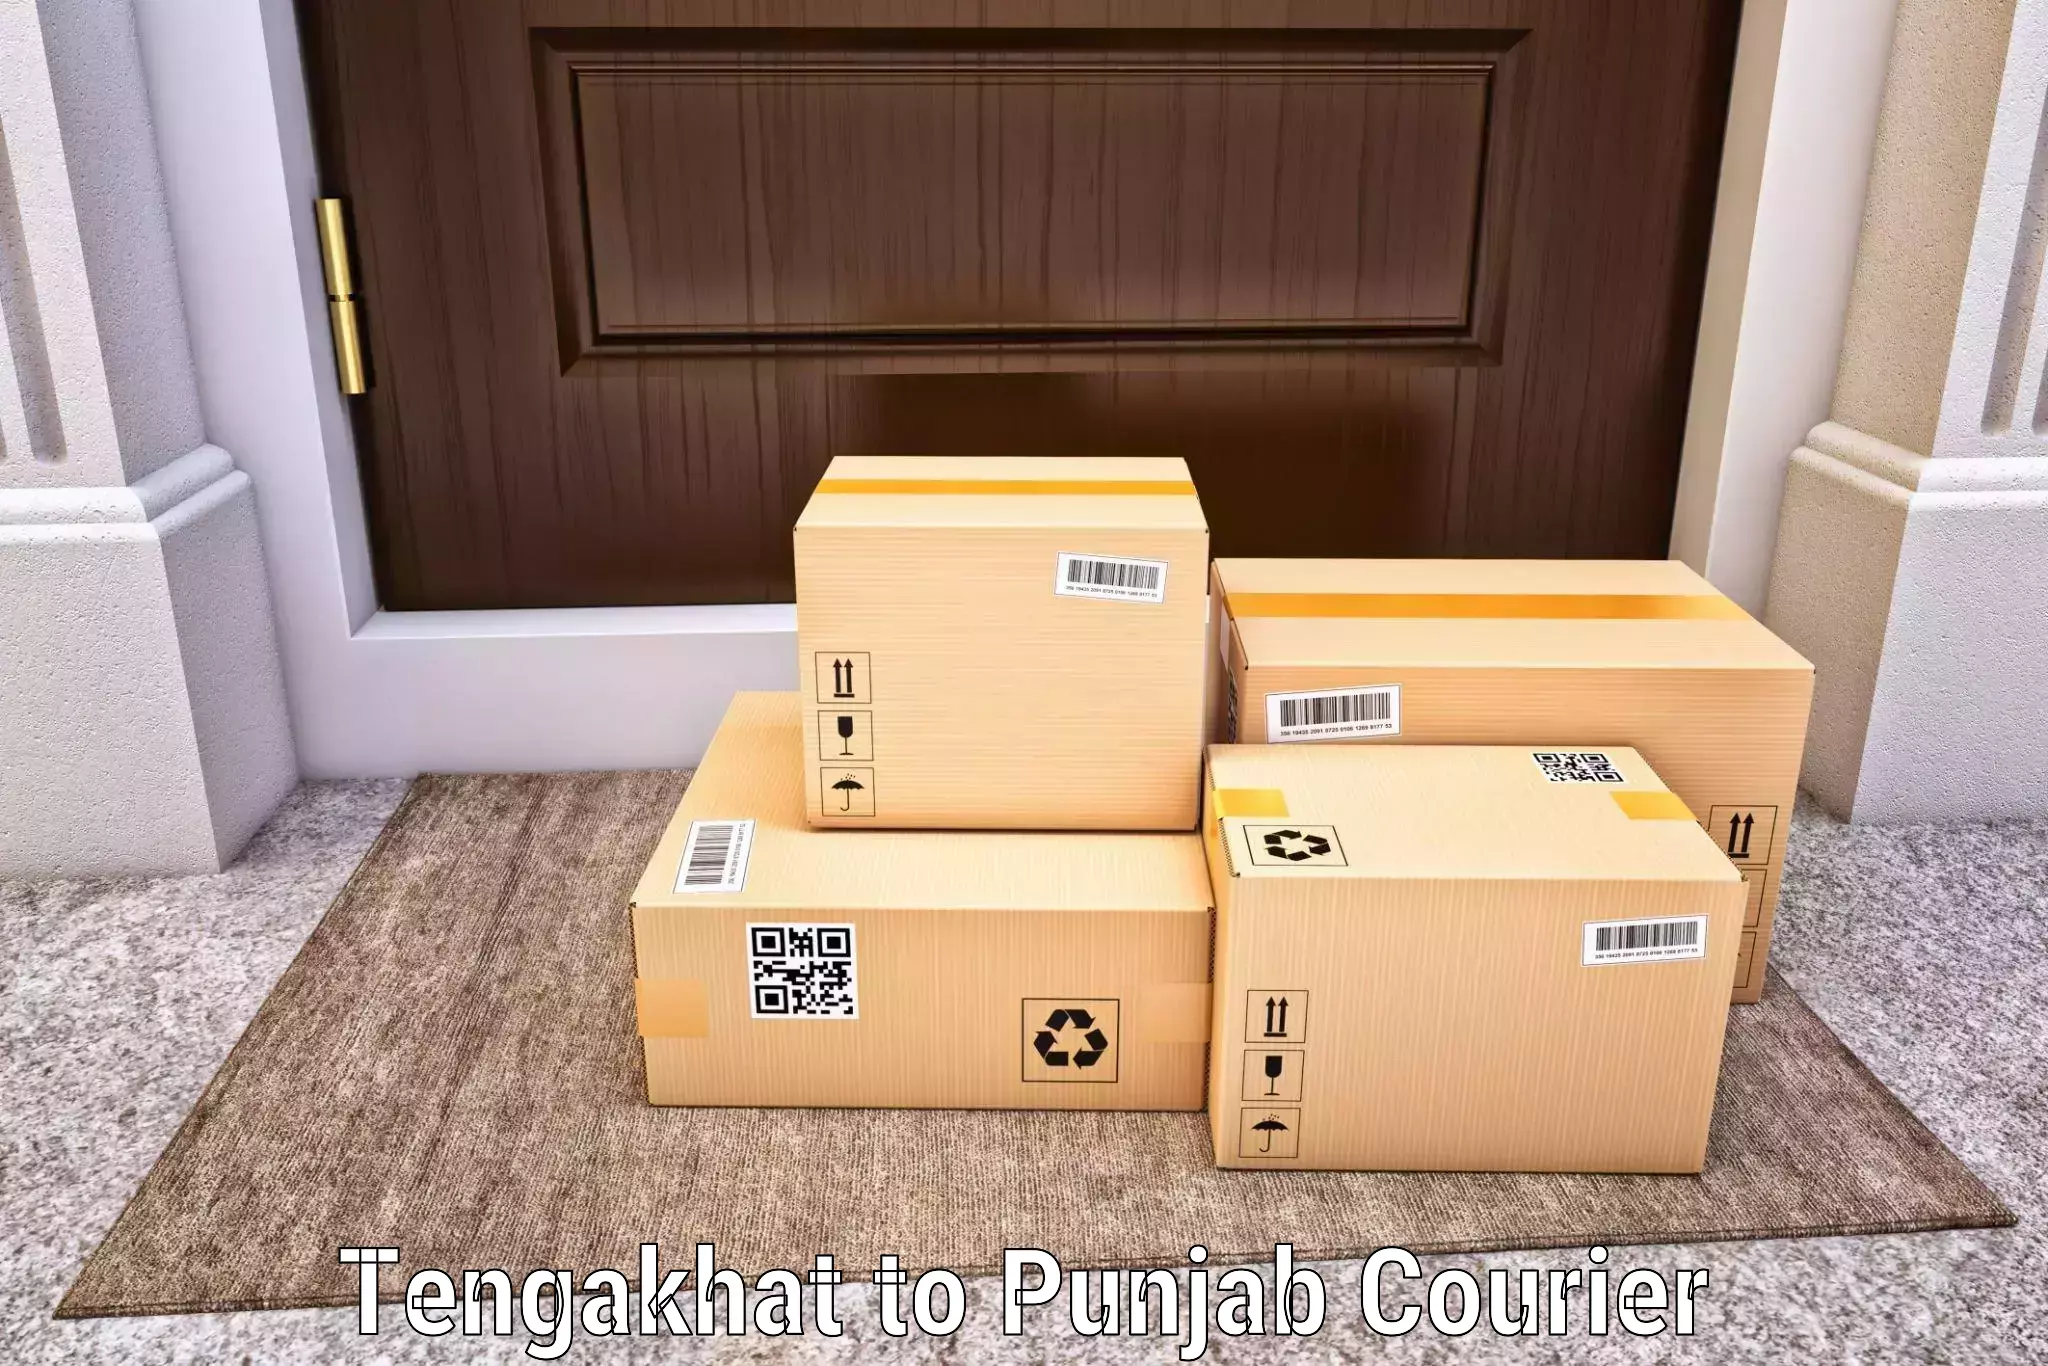 Multi-national courier services Tengakhat to Faridkot